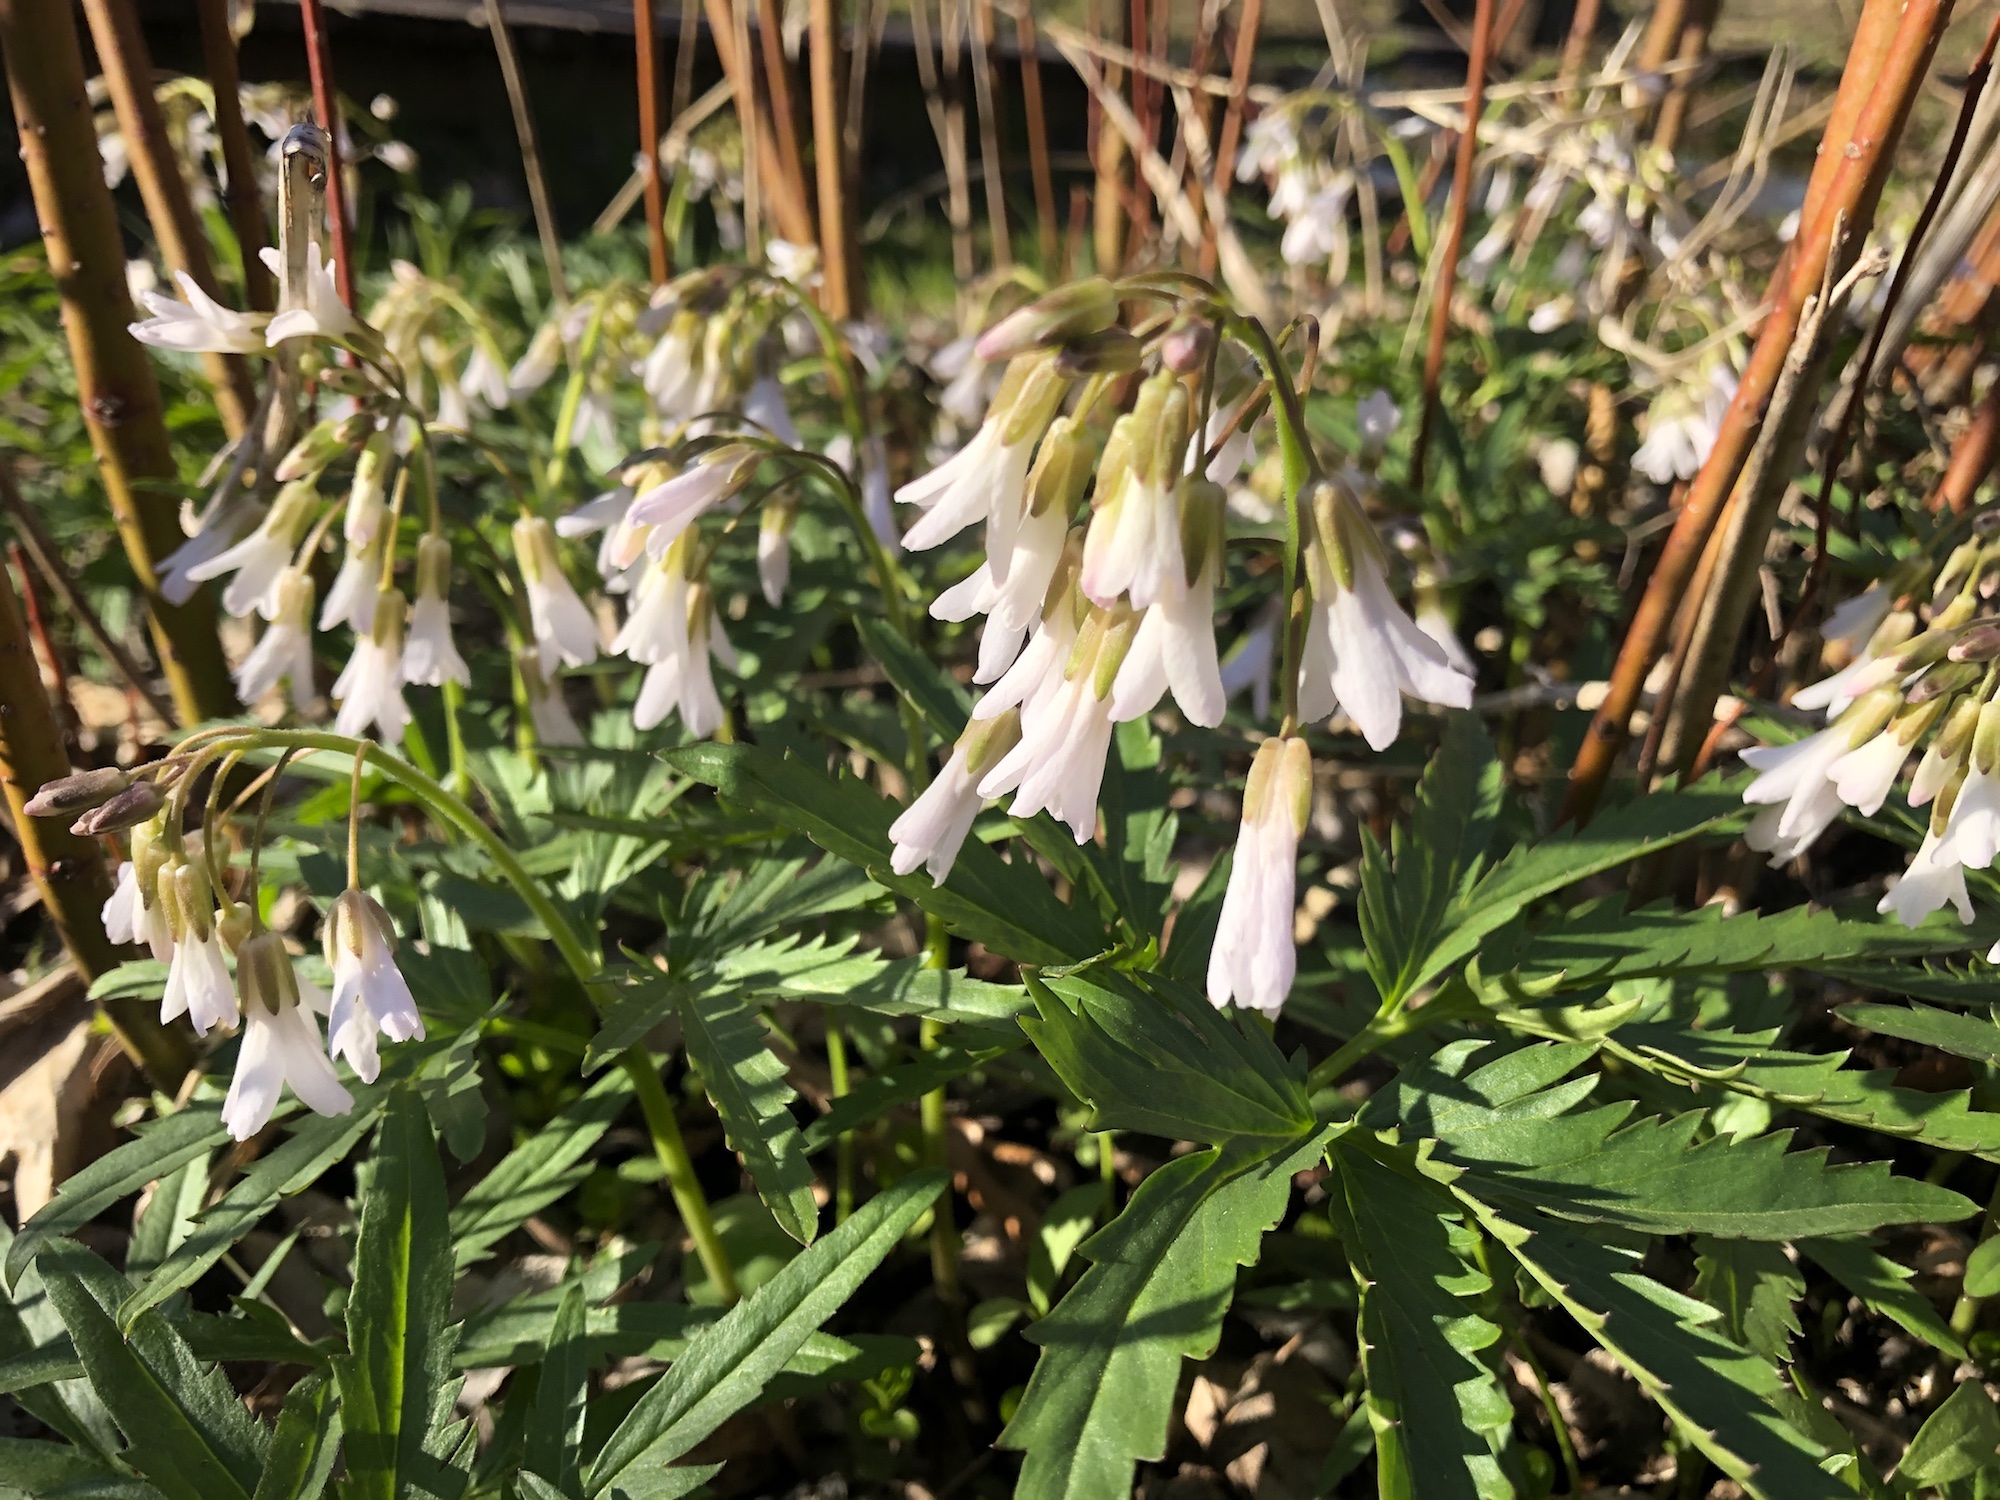 Cutleaf Toothwort in Oak Savanna by Council Ring in Madison, Wisconsin on April 19, 2020.